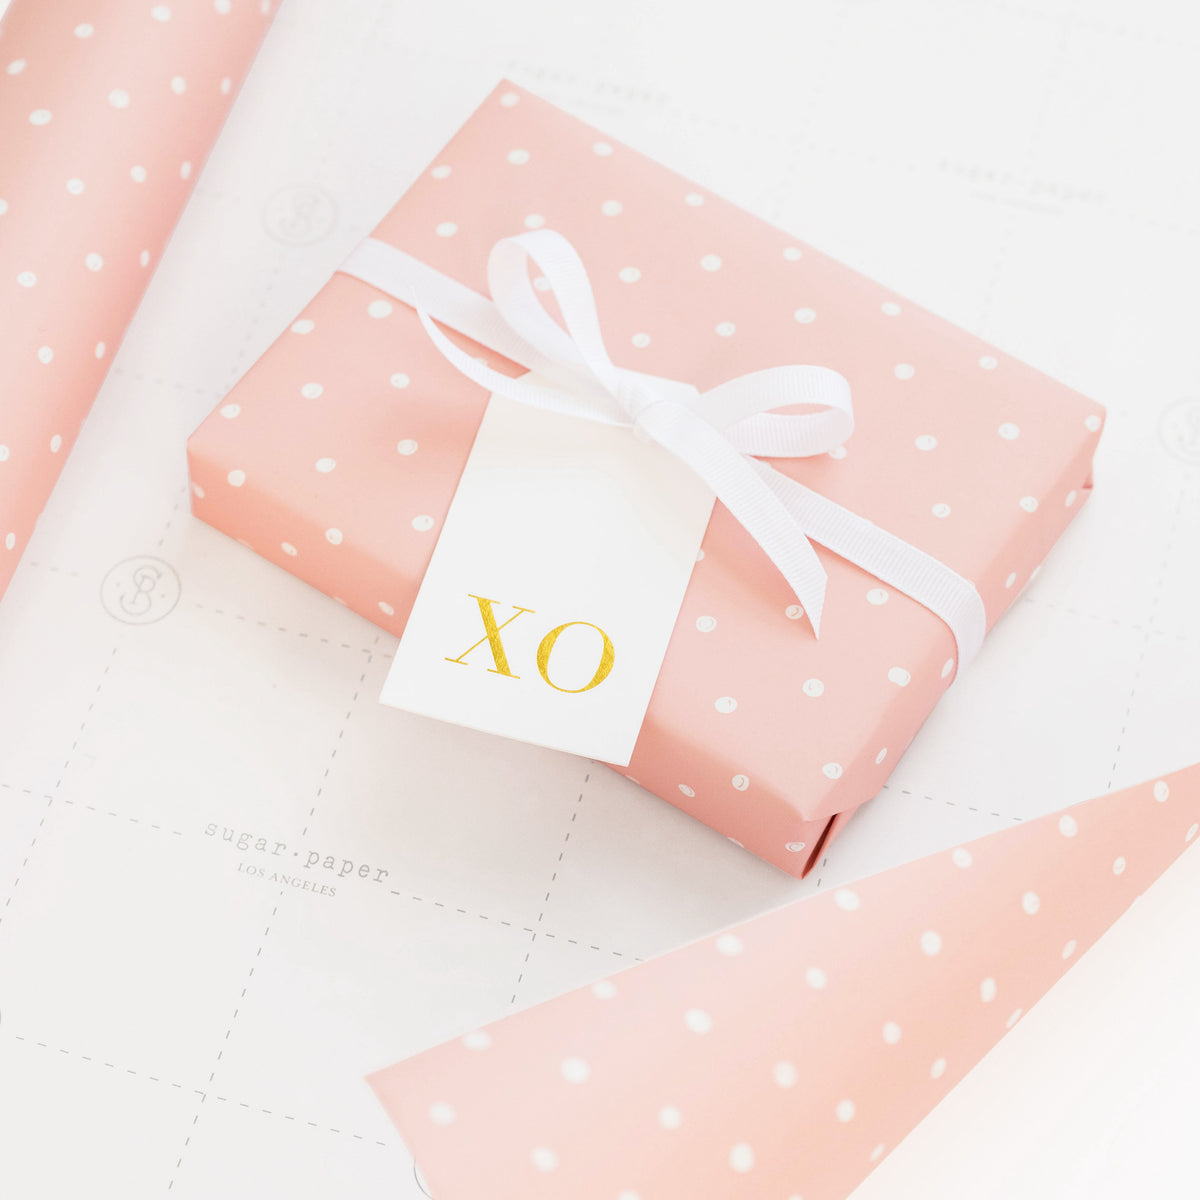 wrapped gift in rose dot wrapping paper with white and gold xo tag